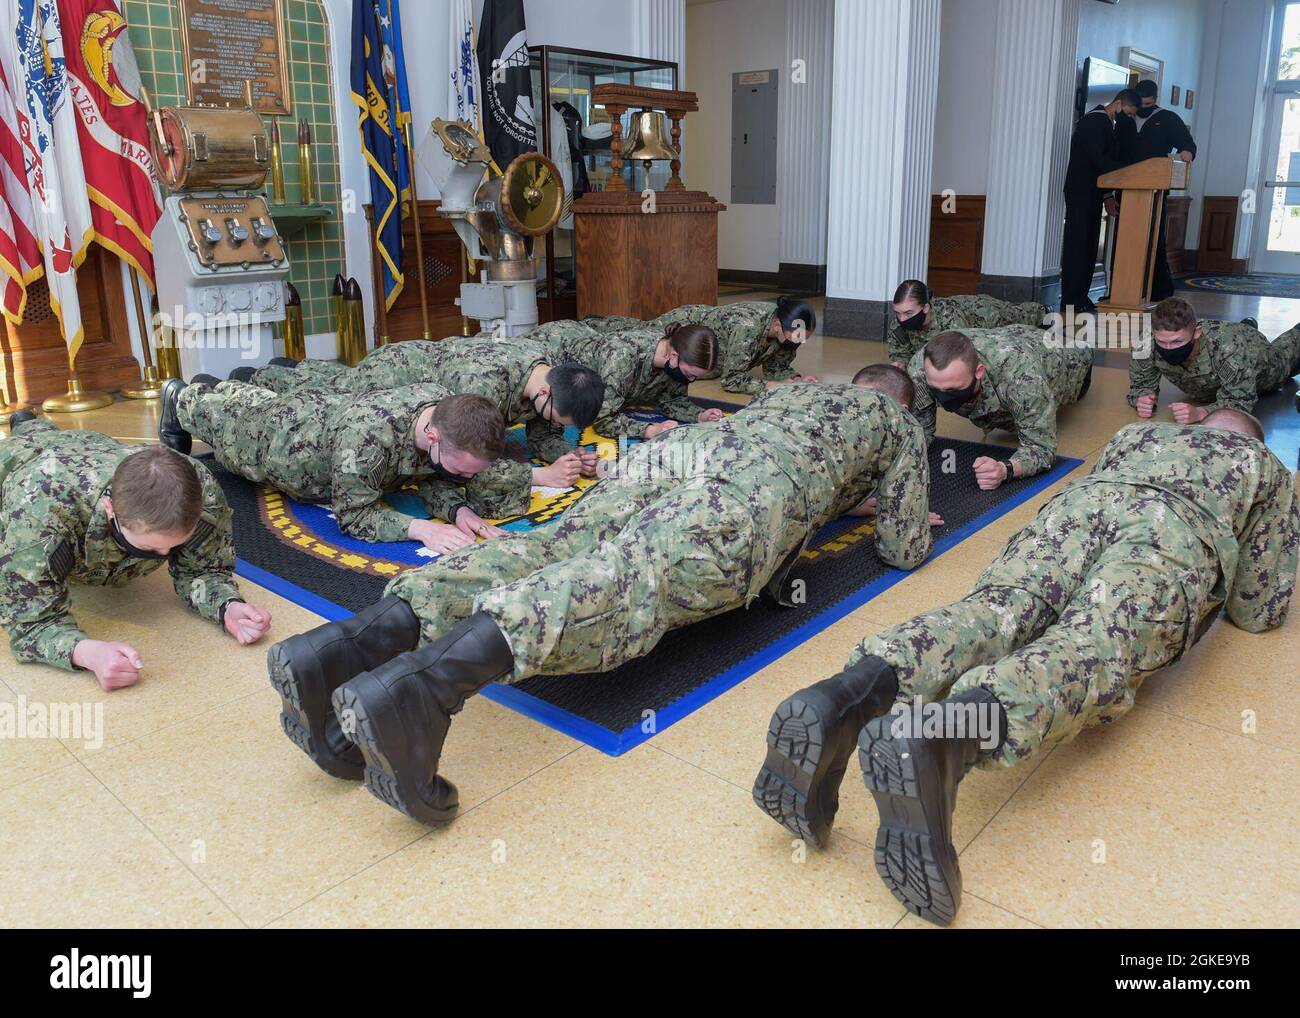 210329-N-KJ380-1019 PENSACOLA, Fla. (March 29, 2021)  New-accession Sailors attached to Information Warfare Training Command (IWTC) Corry Station participate in a peer-led plank challenge in preparation of the Navy’s upcoming Physical Fitness Assessment onboard Naval Air Station Pensacola Corry Station, Pensacola, Florida. These Sailors are just some of the many thousands training and preparing to defend America around the world as information warfare warfighters. IWTC Corry Station is a part of Center for Information Warfare Training domain. Training over 22,000 students every year, CIWT deli Stock Photo